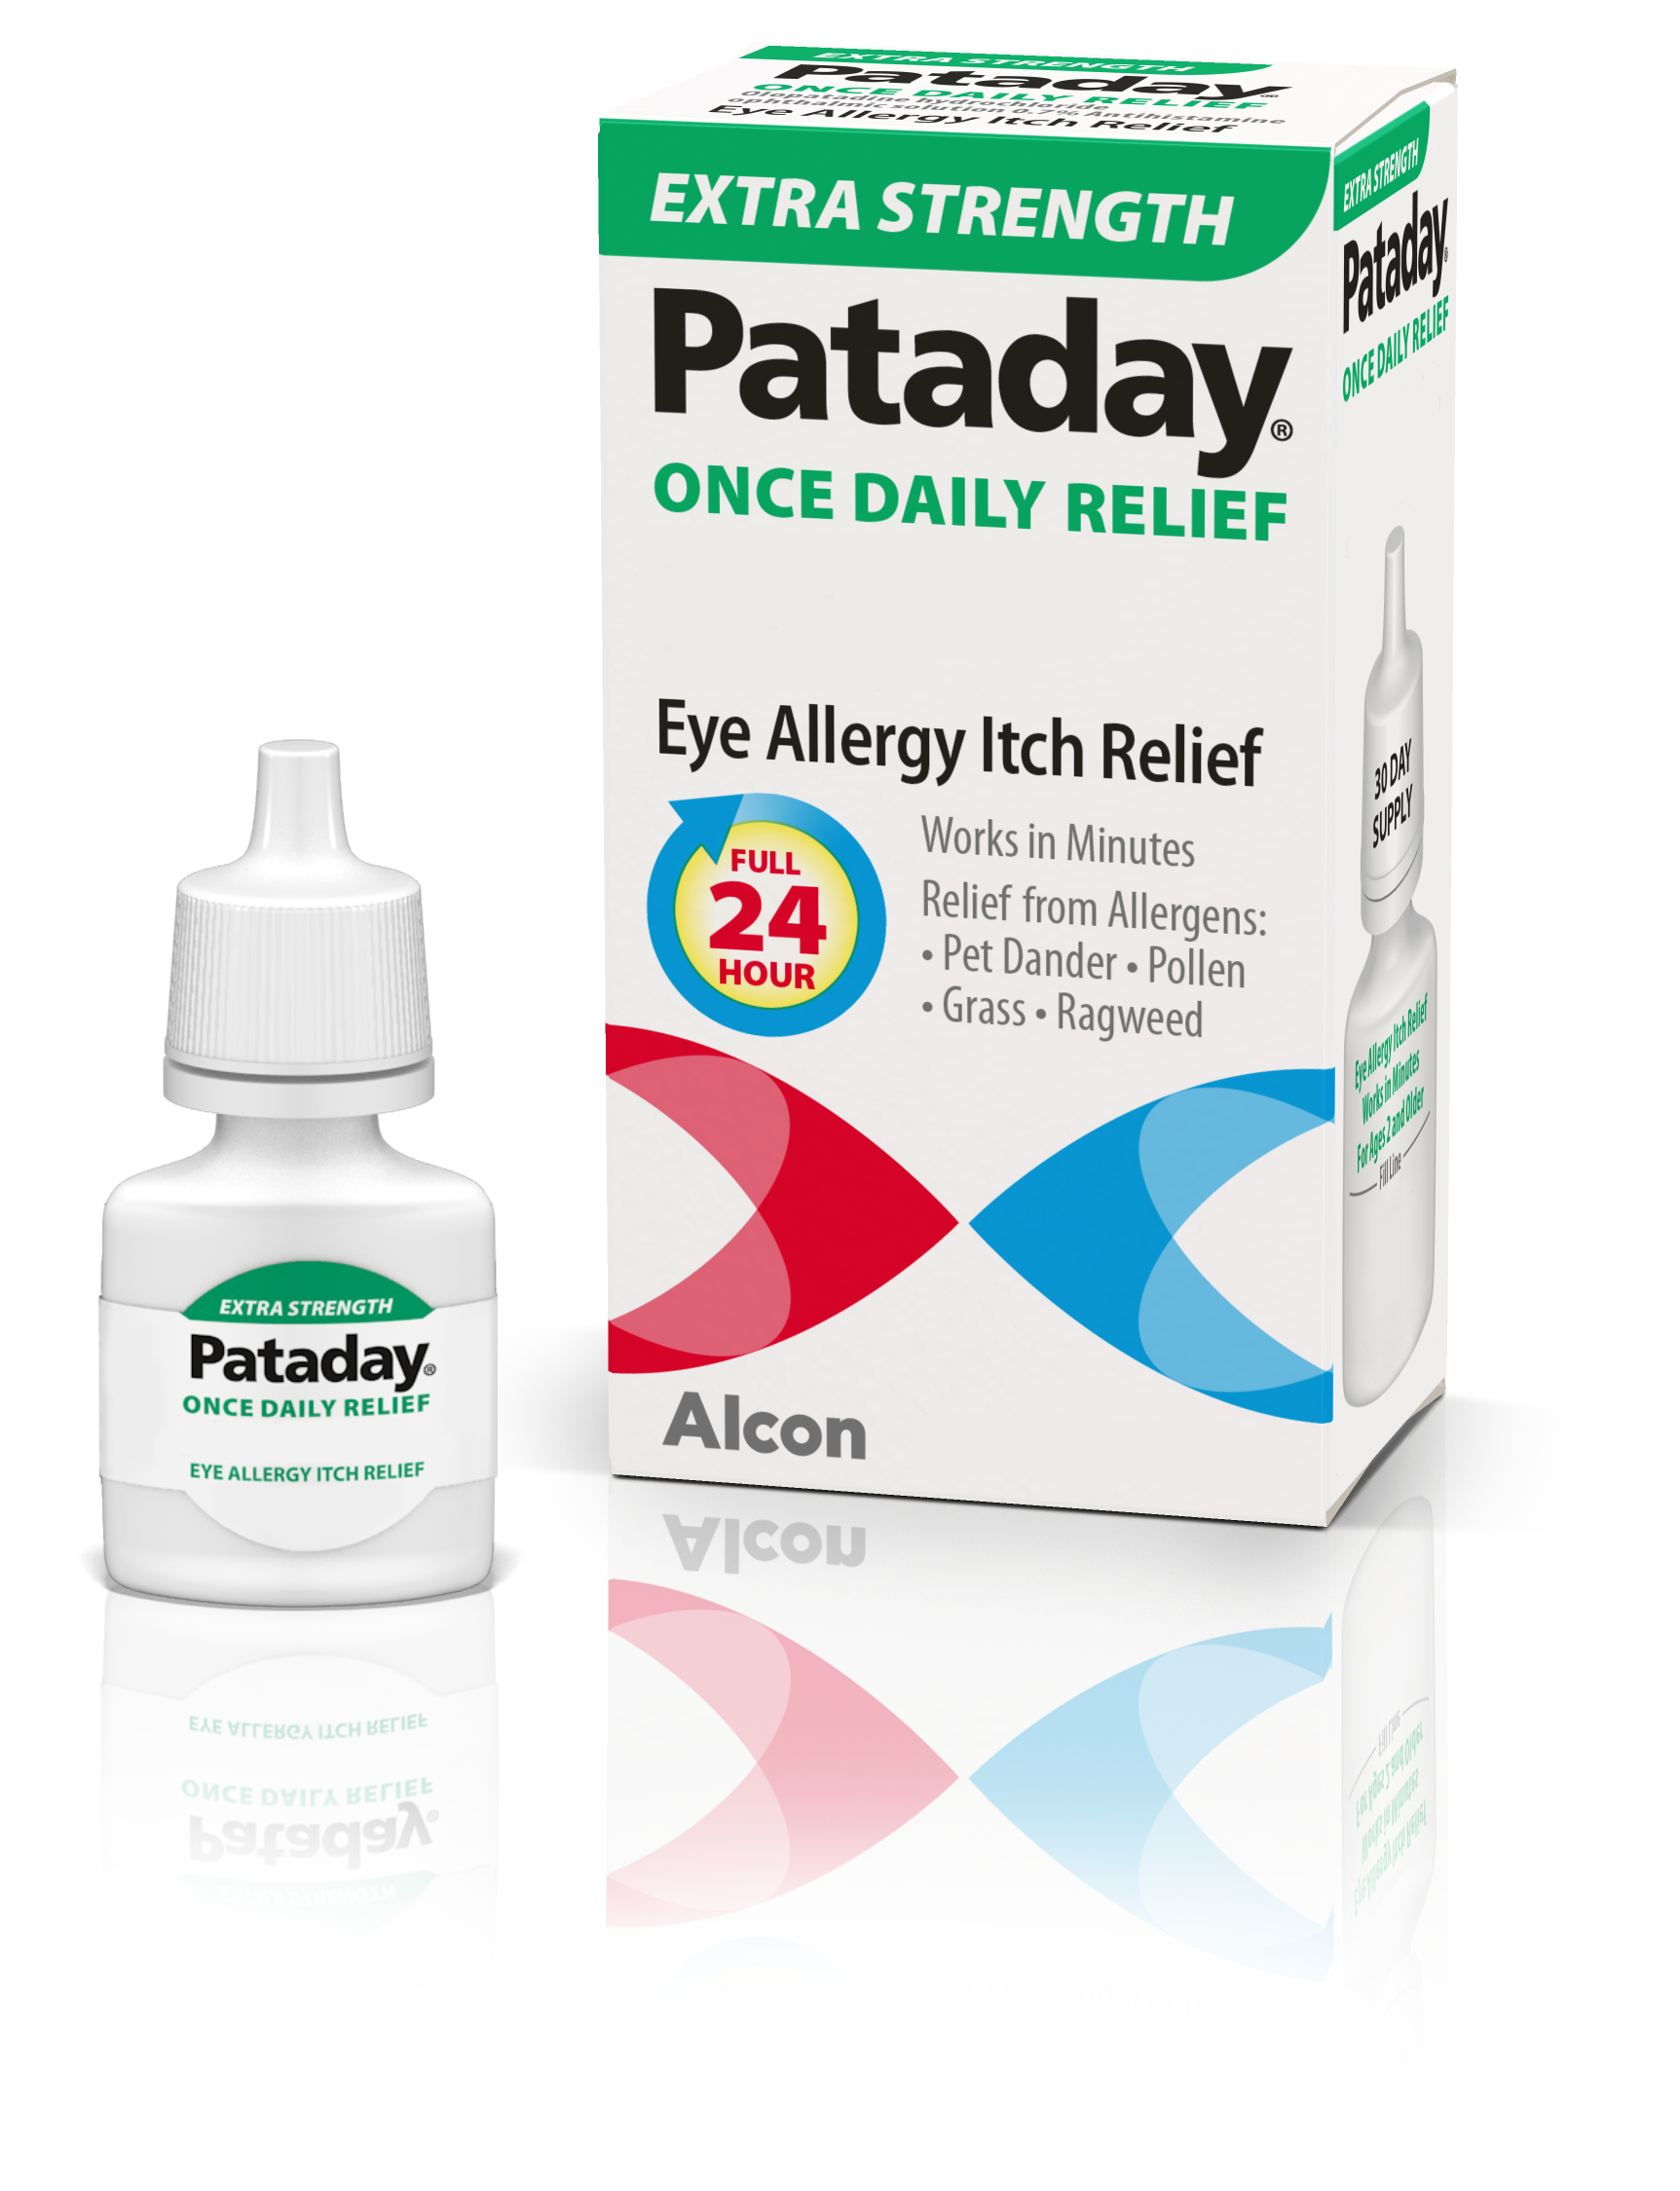 bottle and product box for Extra Strength Pataday eye allergy itch relief drops by Alcon